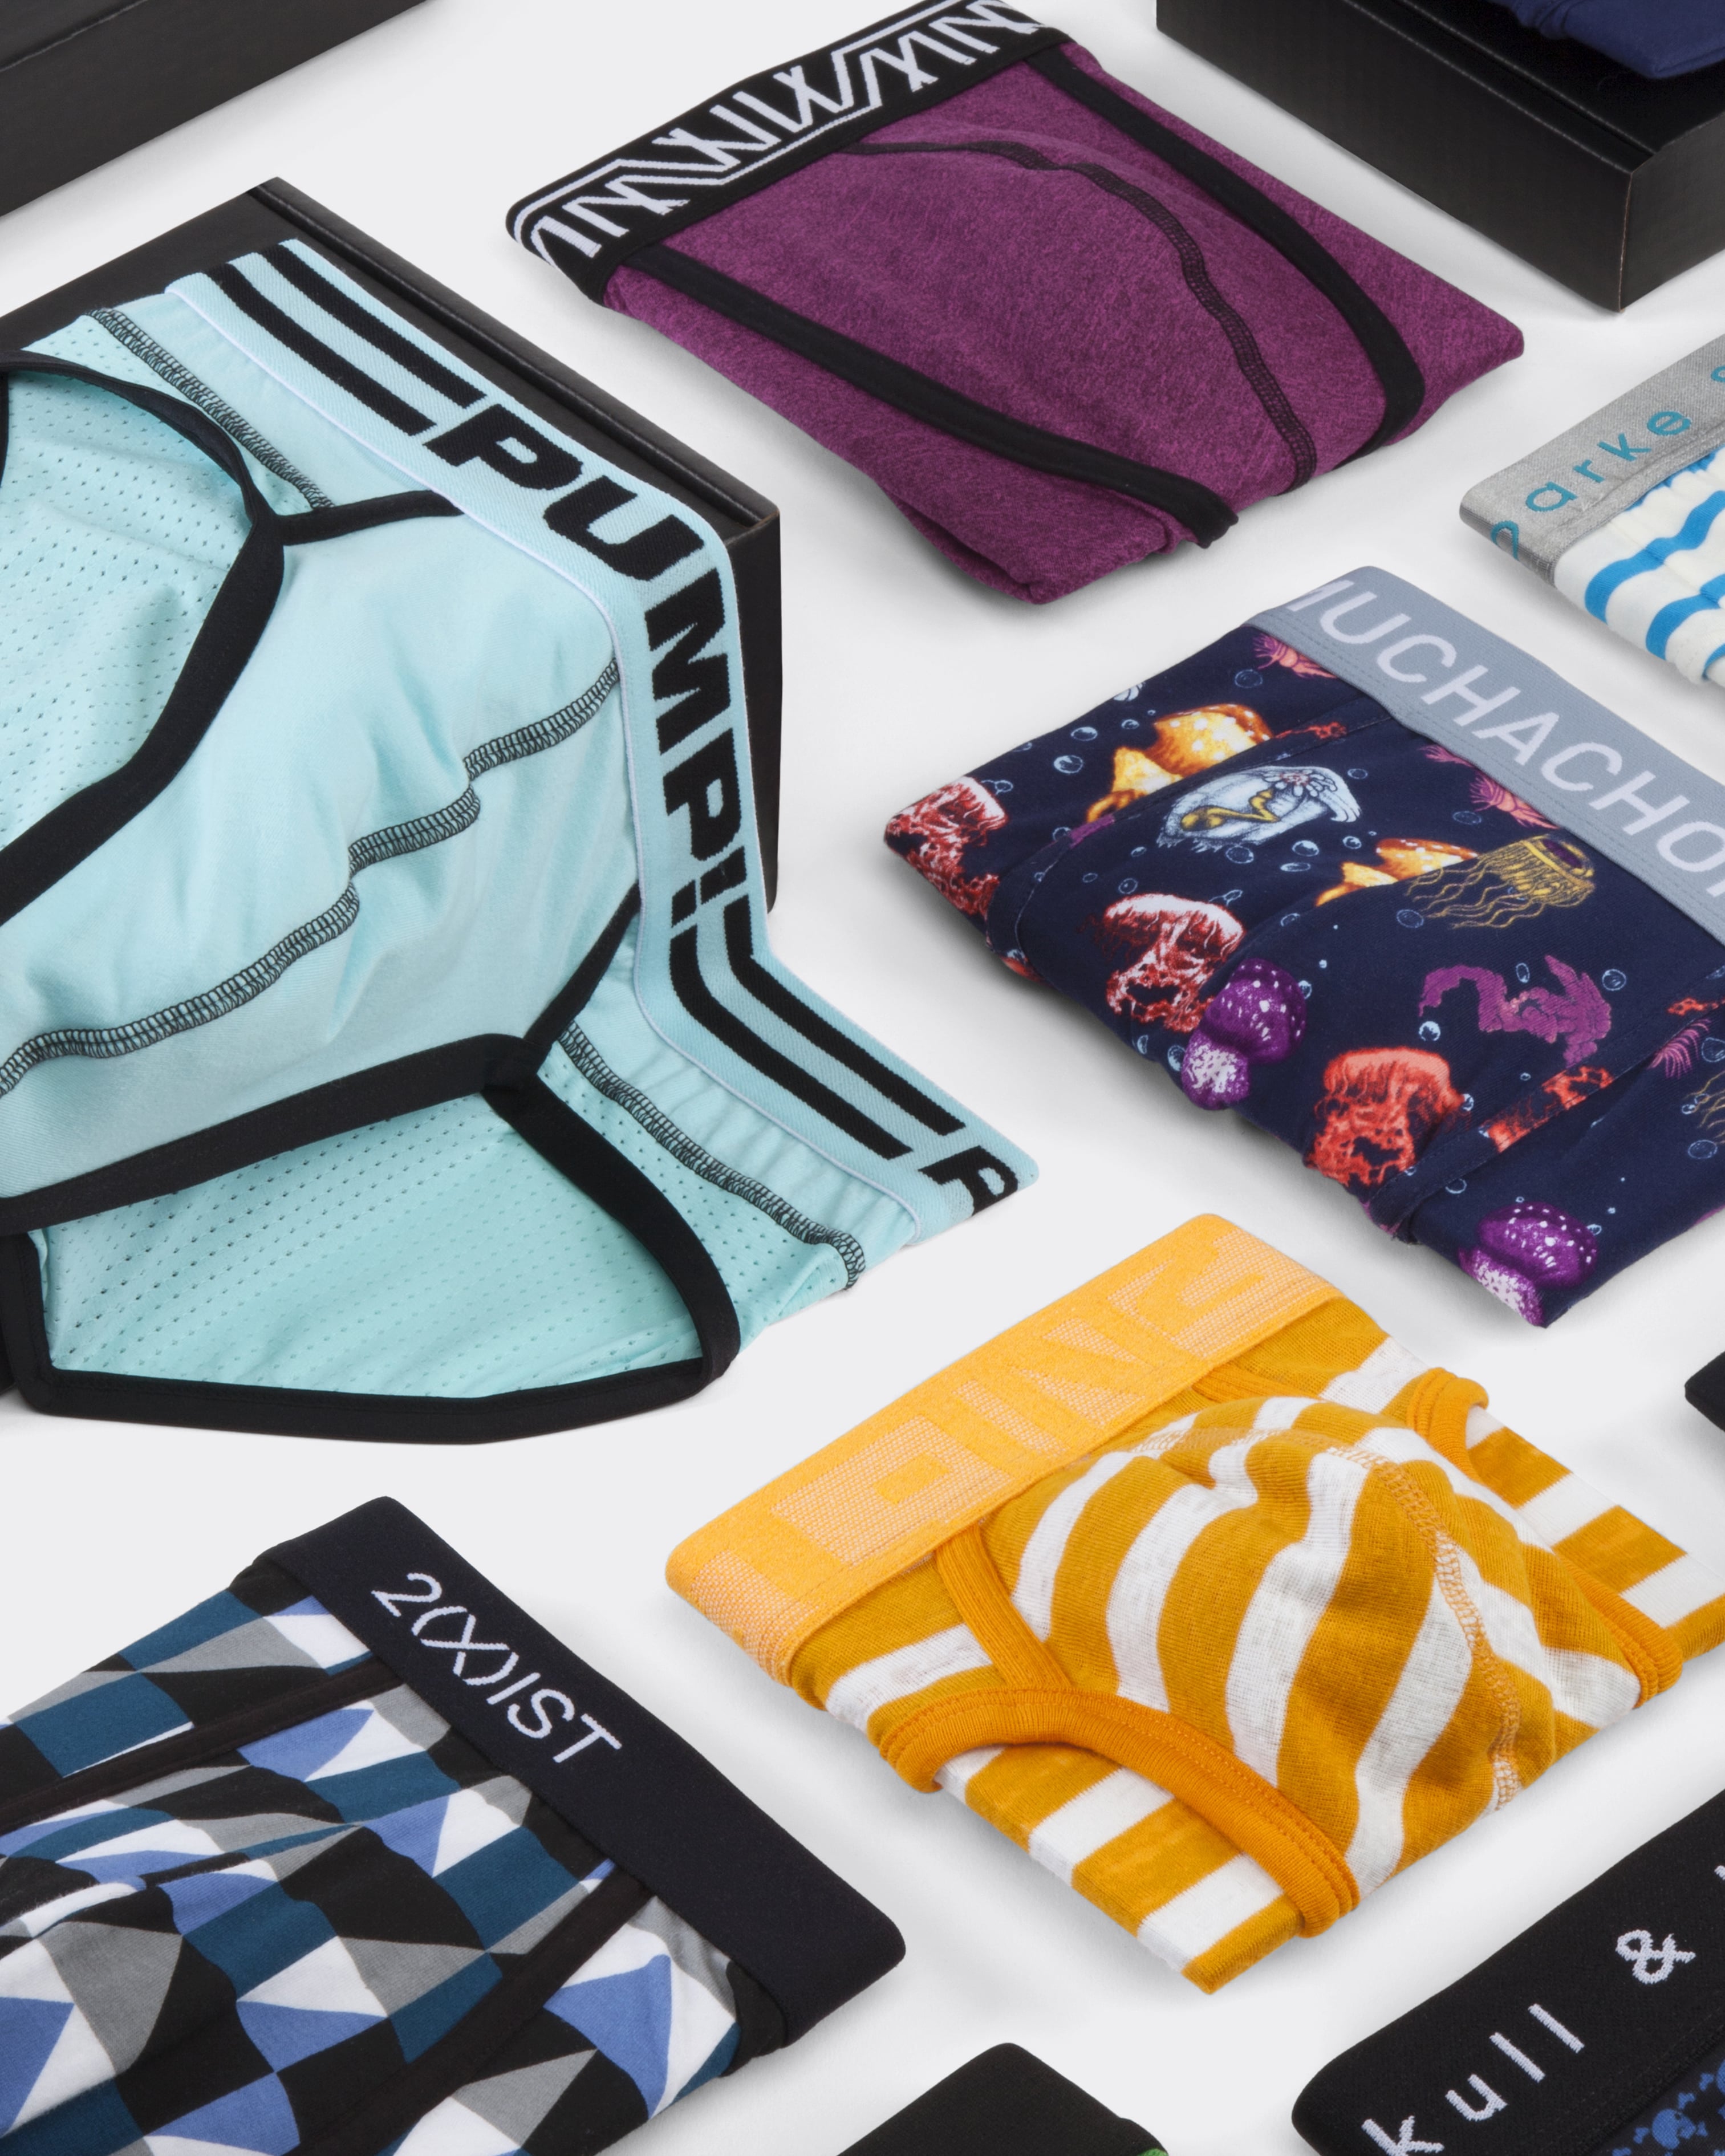 Underwear Expert uses Spree for its subscription-based curated club